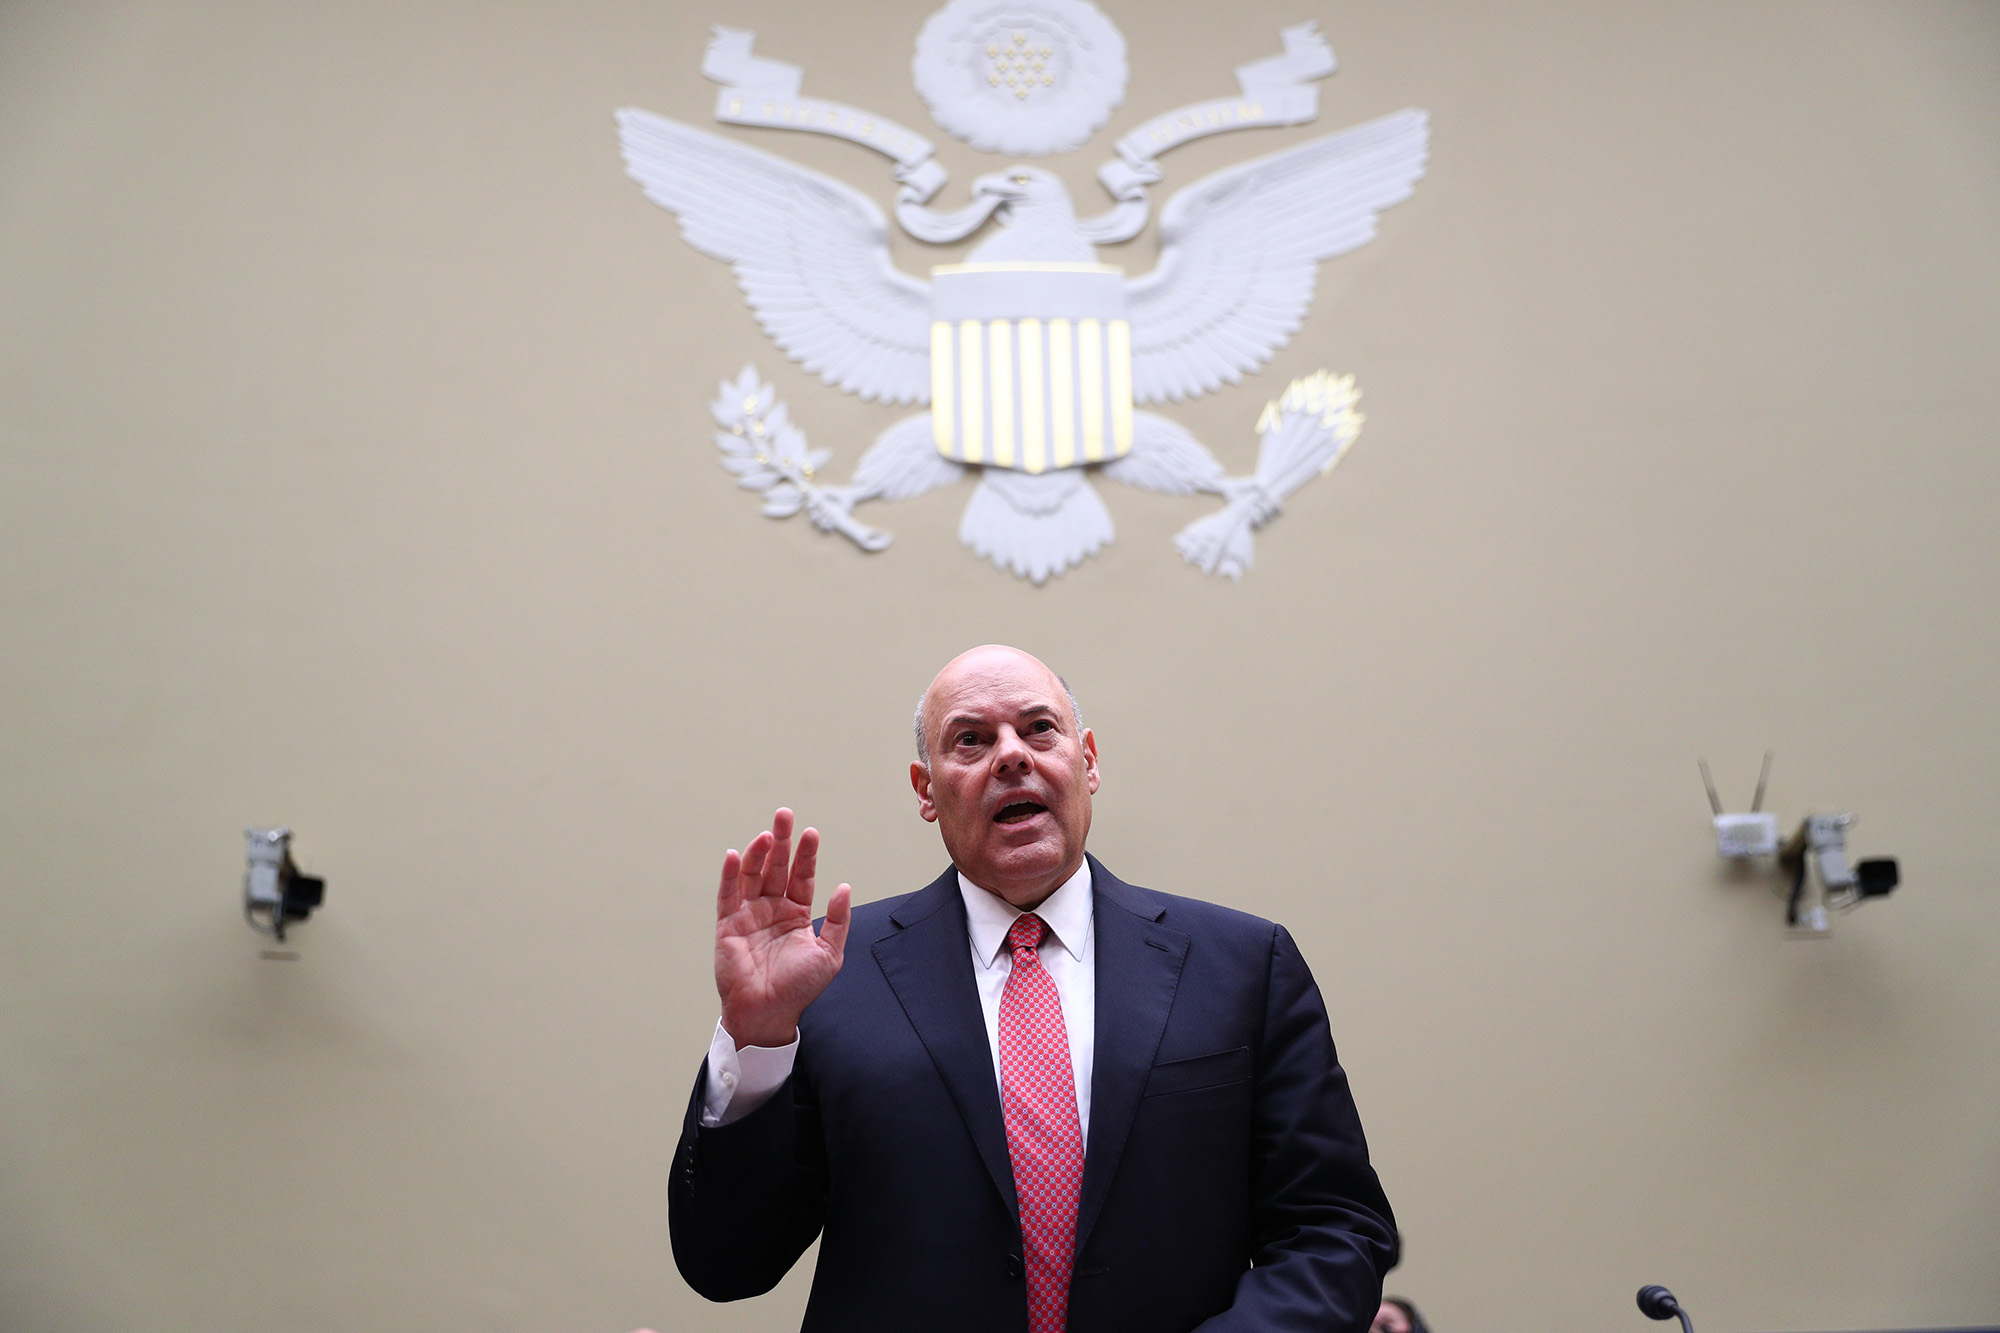 Louis DeJoy is sworn in prior to a House Oversight and Reform Committee hearing in Washington on Aug. 24.